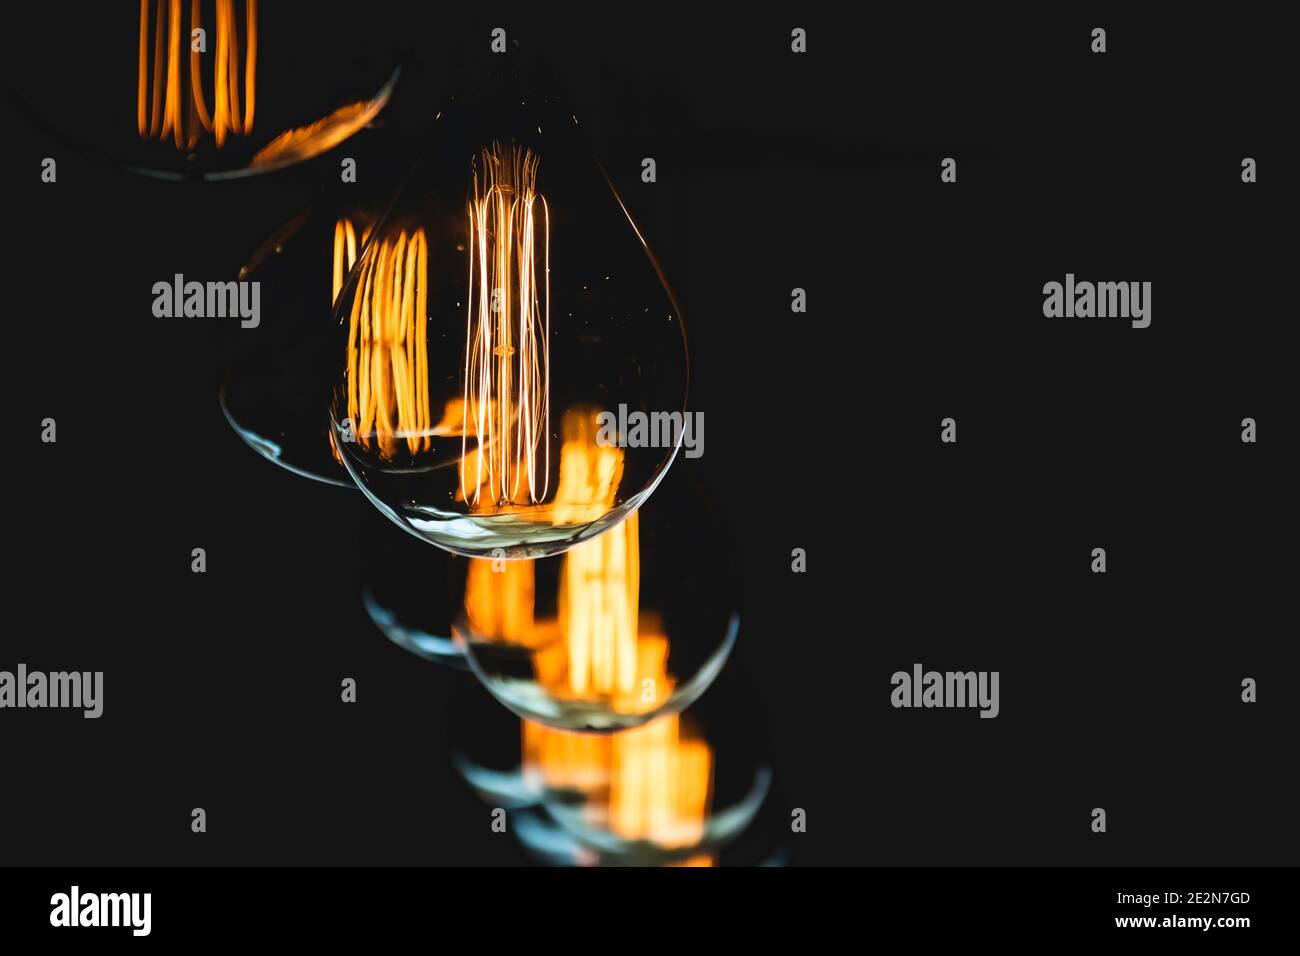 Lightbulb(s) and their glowing filaments shot in a dark interior of an upscale modern western-style saloon.  Orange and yellow glowing tones. Stock Photo